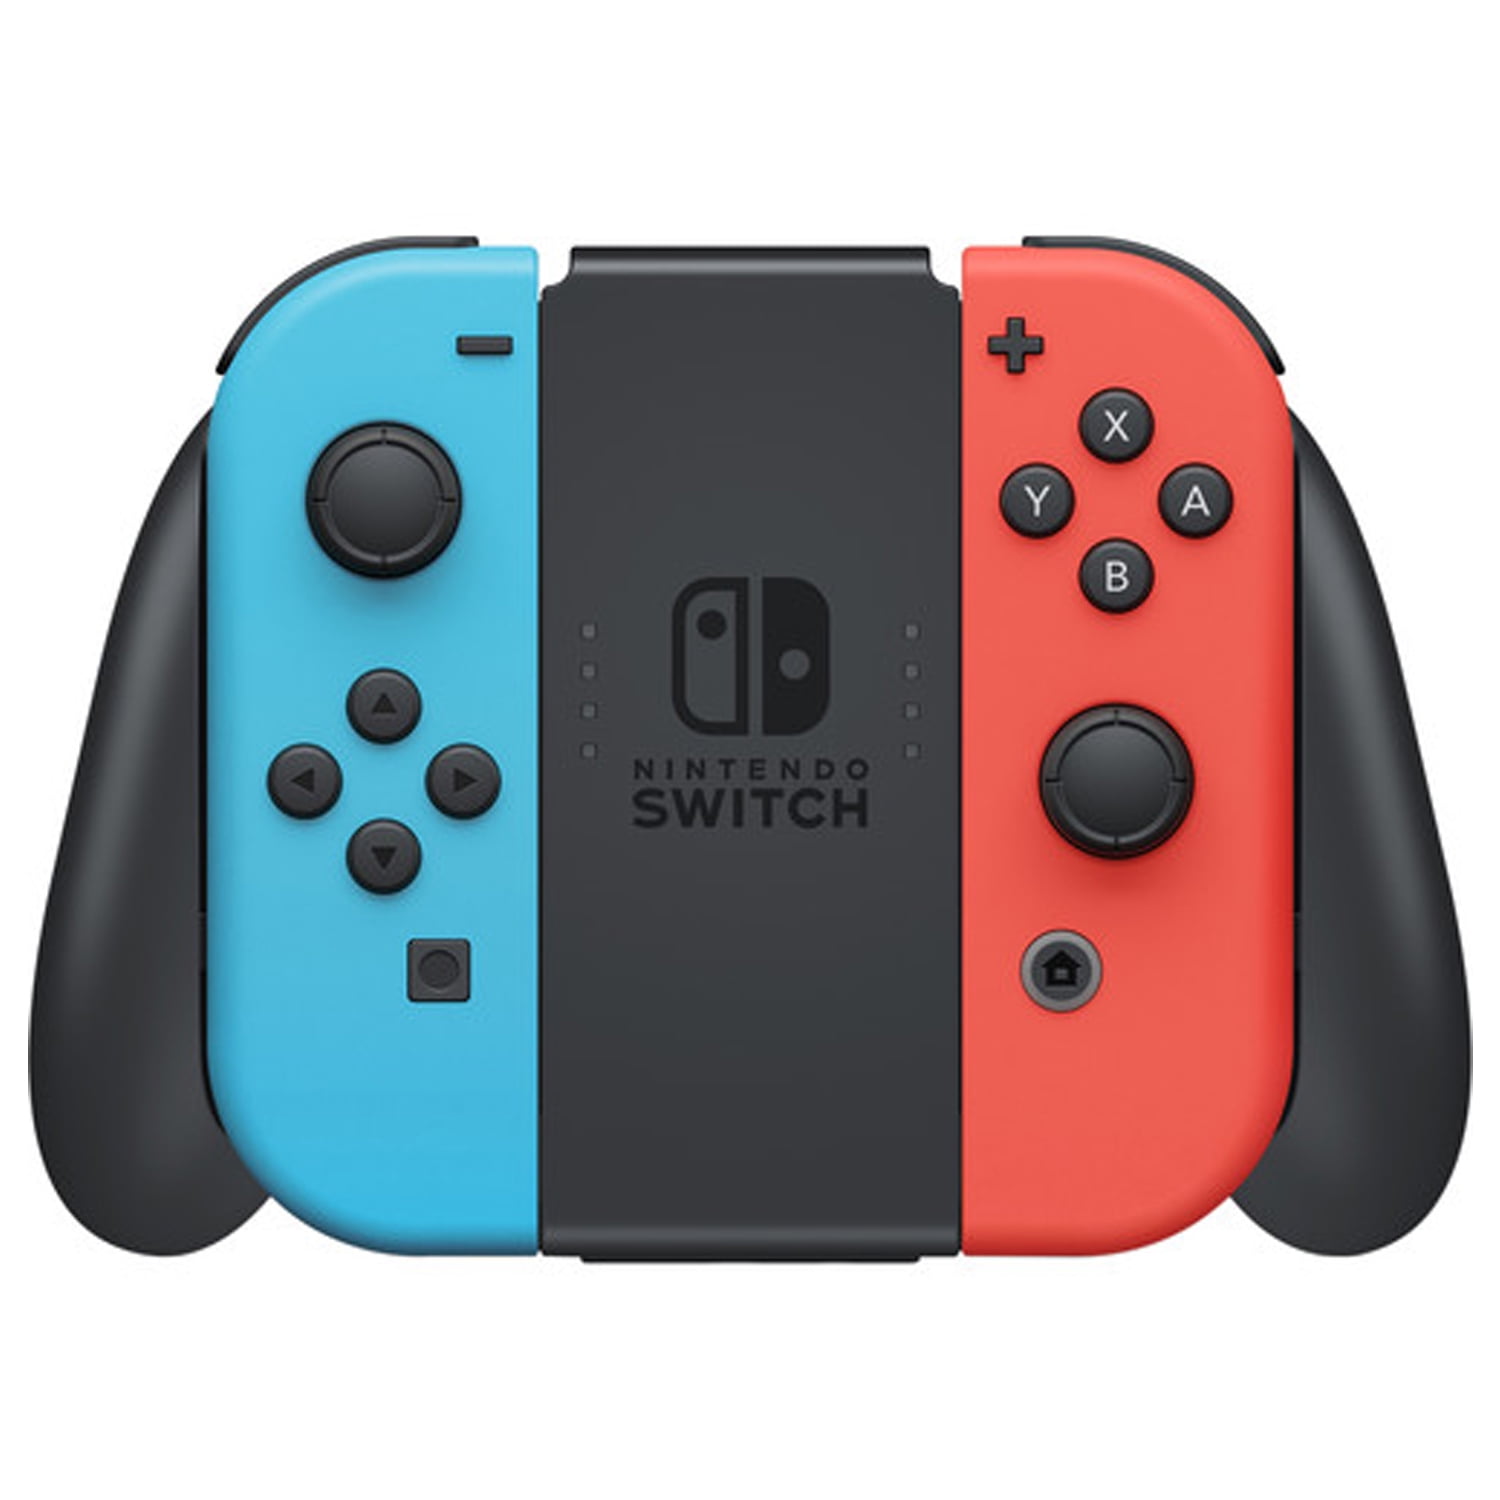 Nintendo Switch (Neon Blue/Red) with 128GB microSD and Switch Pro Controller